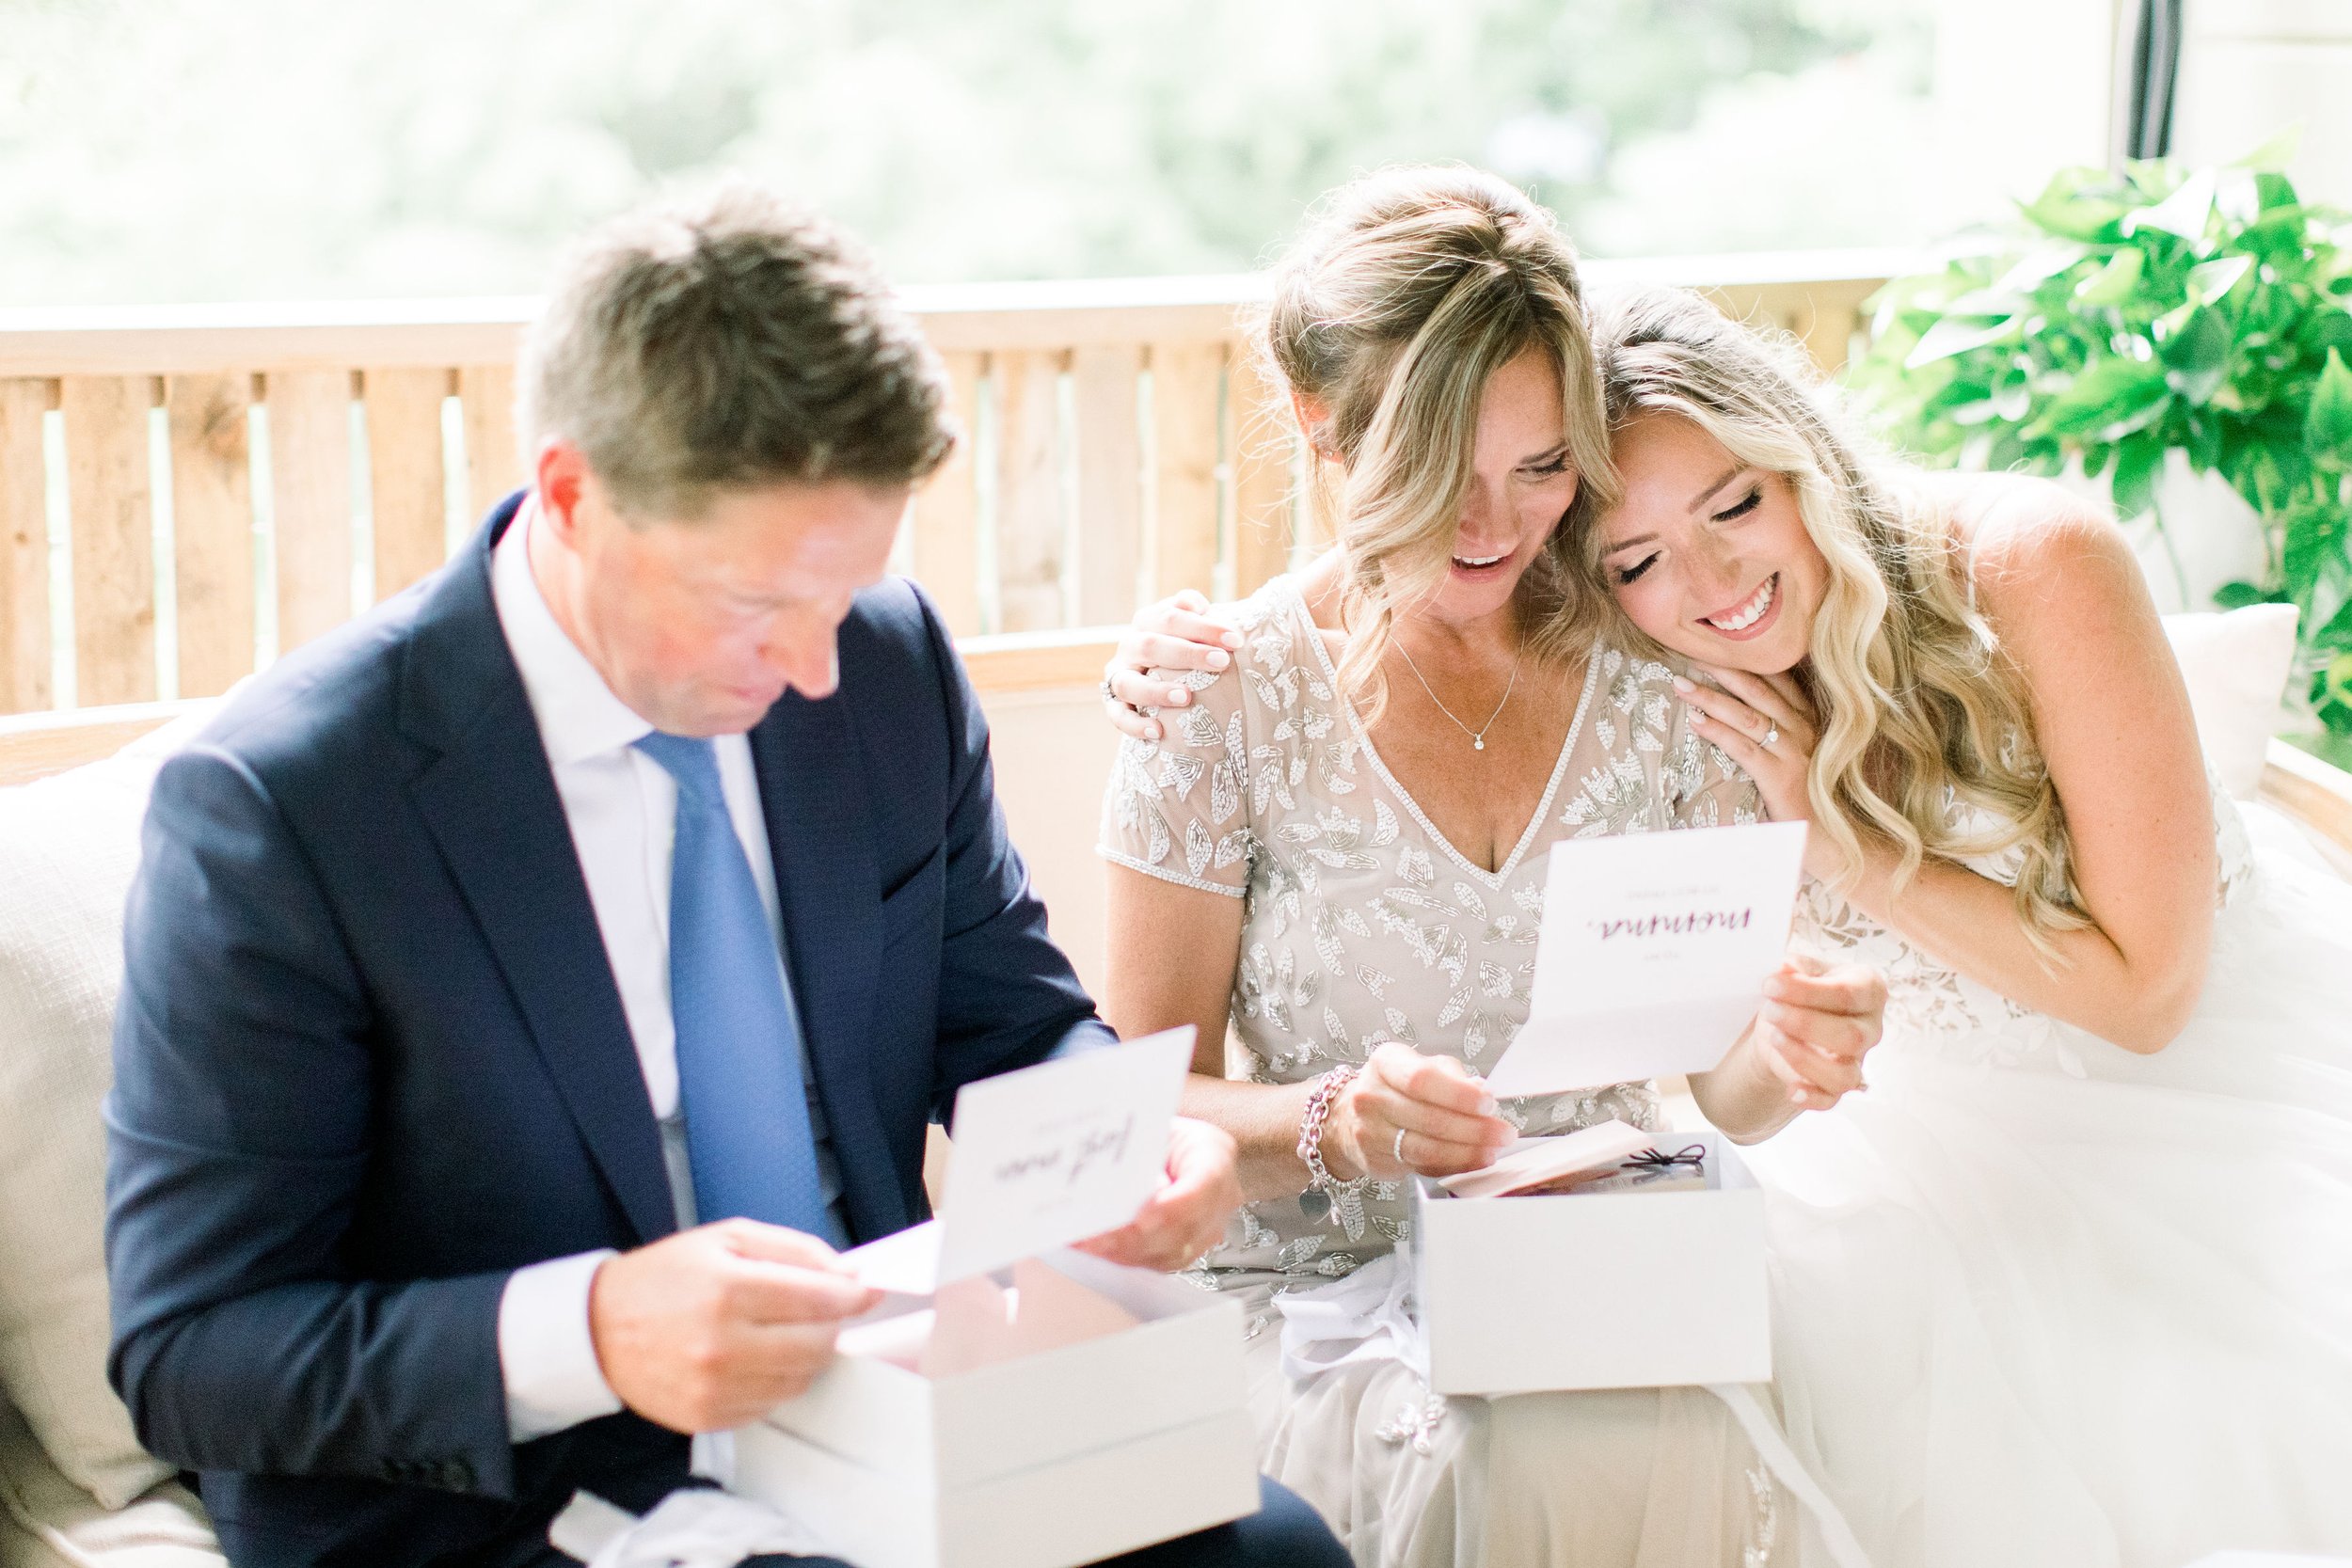  The father and mother of the bride read notes from the bride before the wedding by Chelsea Mason Photography. wedding details notes mom #Quebecweddings #elegantoutdoorwedding #Quebecweddingphotographers #Chelseamasonphotography #Chelseamasonweddings